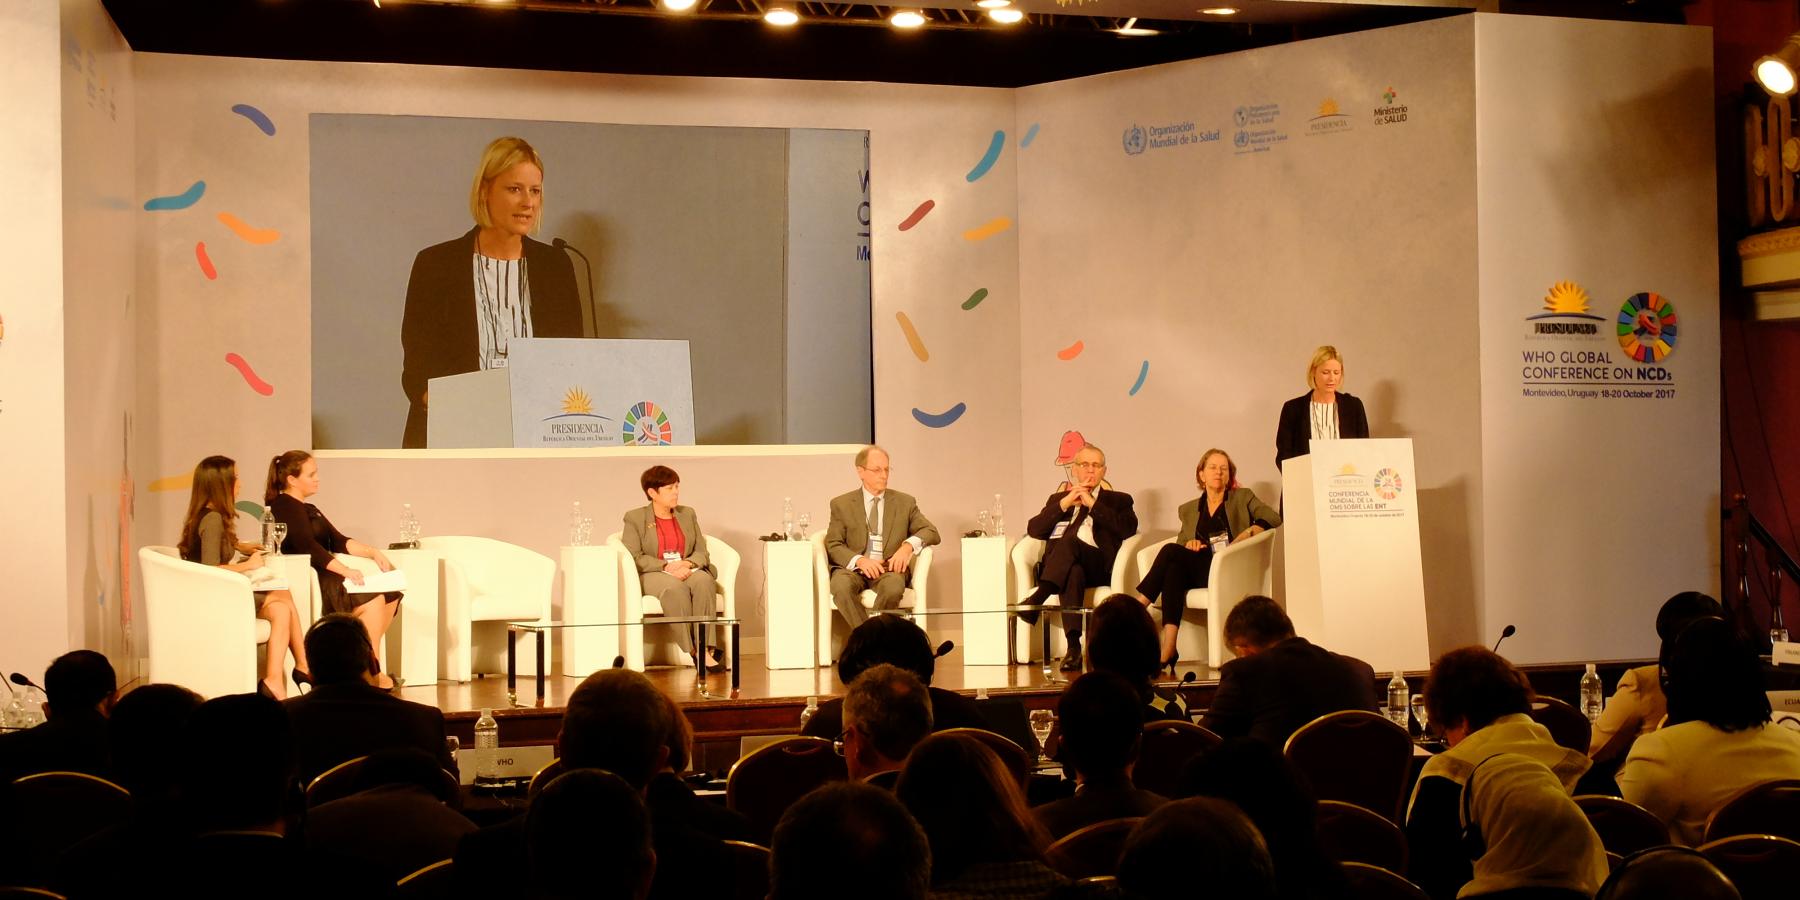 NCD Alliance CEO Katie Dain speaking at the WHO Global Conference on NCDS, Montevideo, Oct. 2017